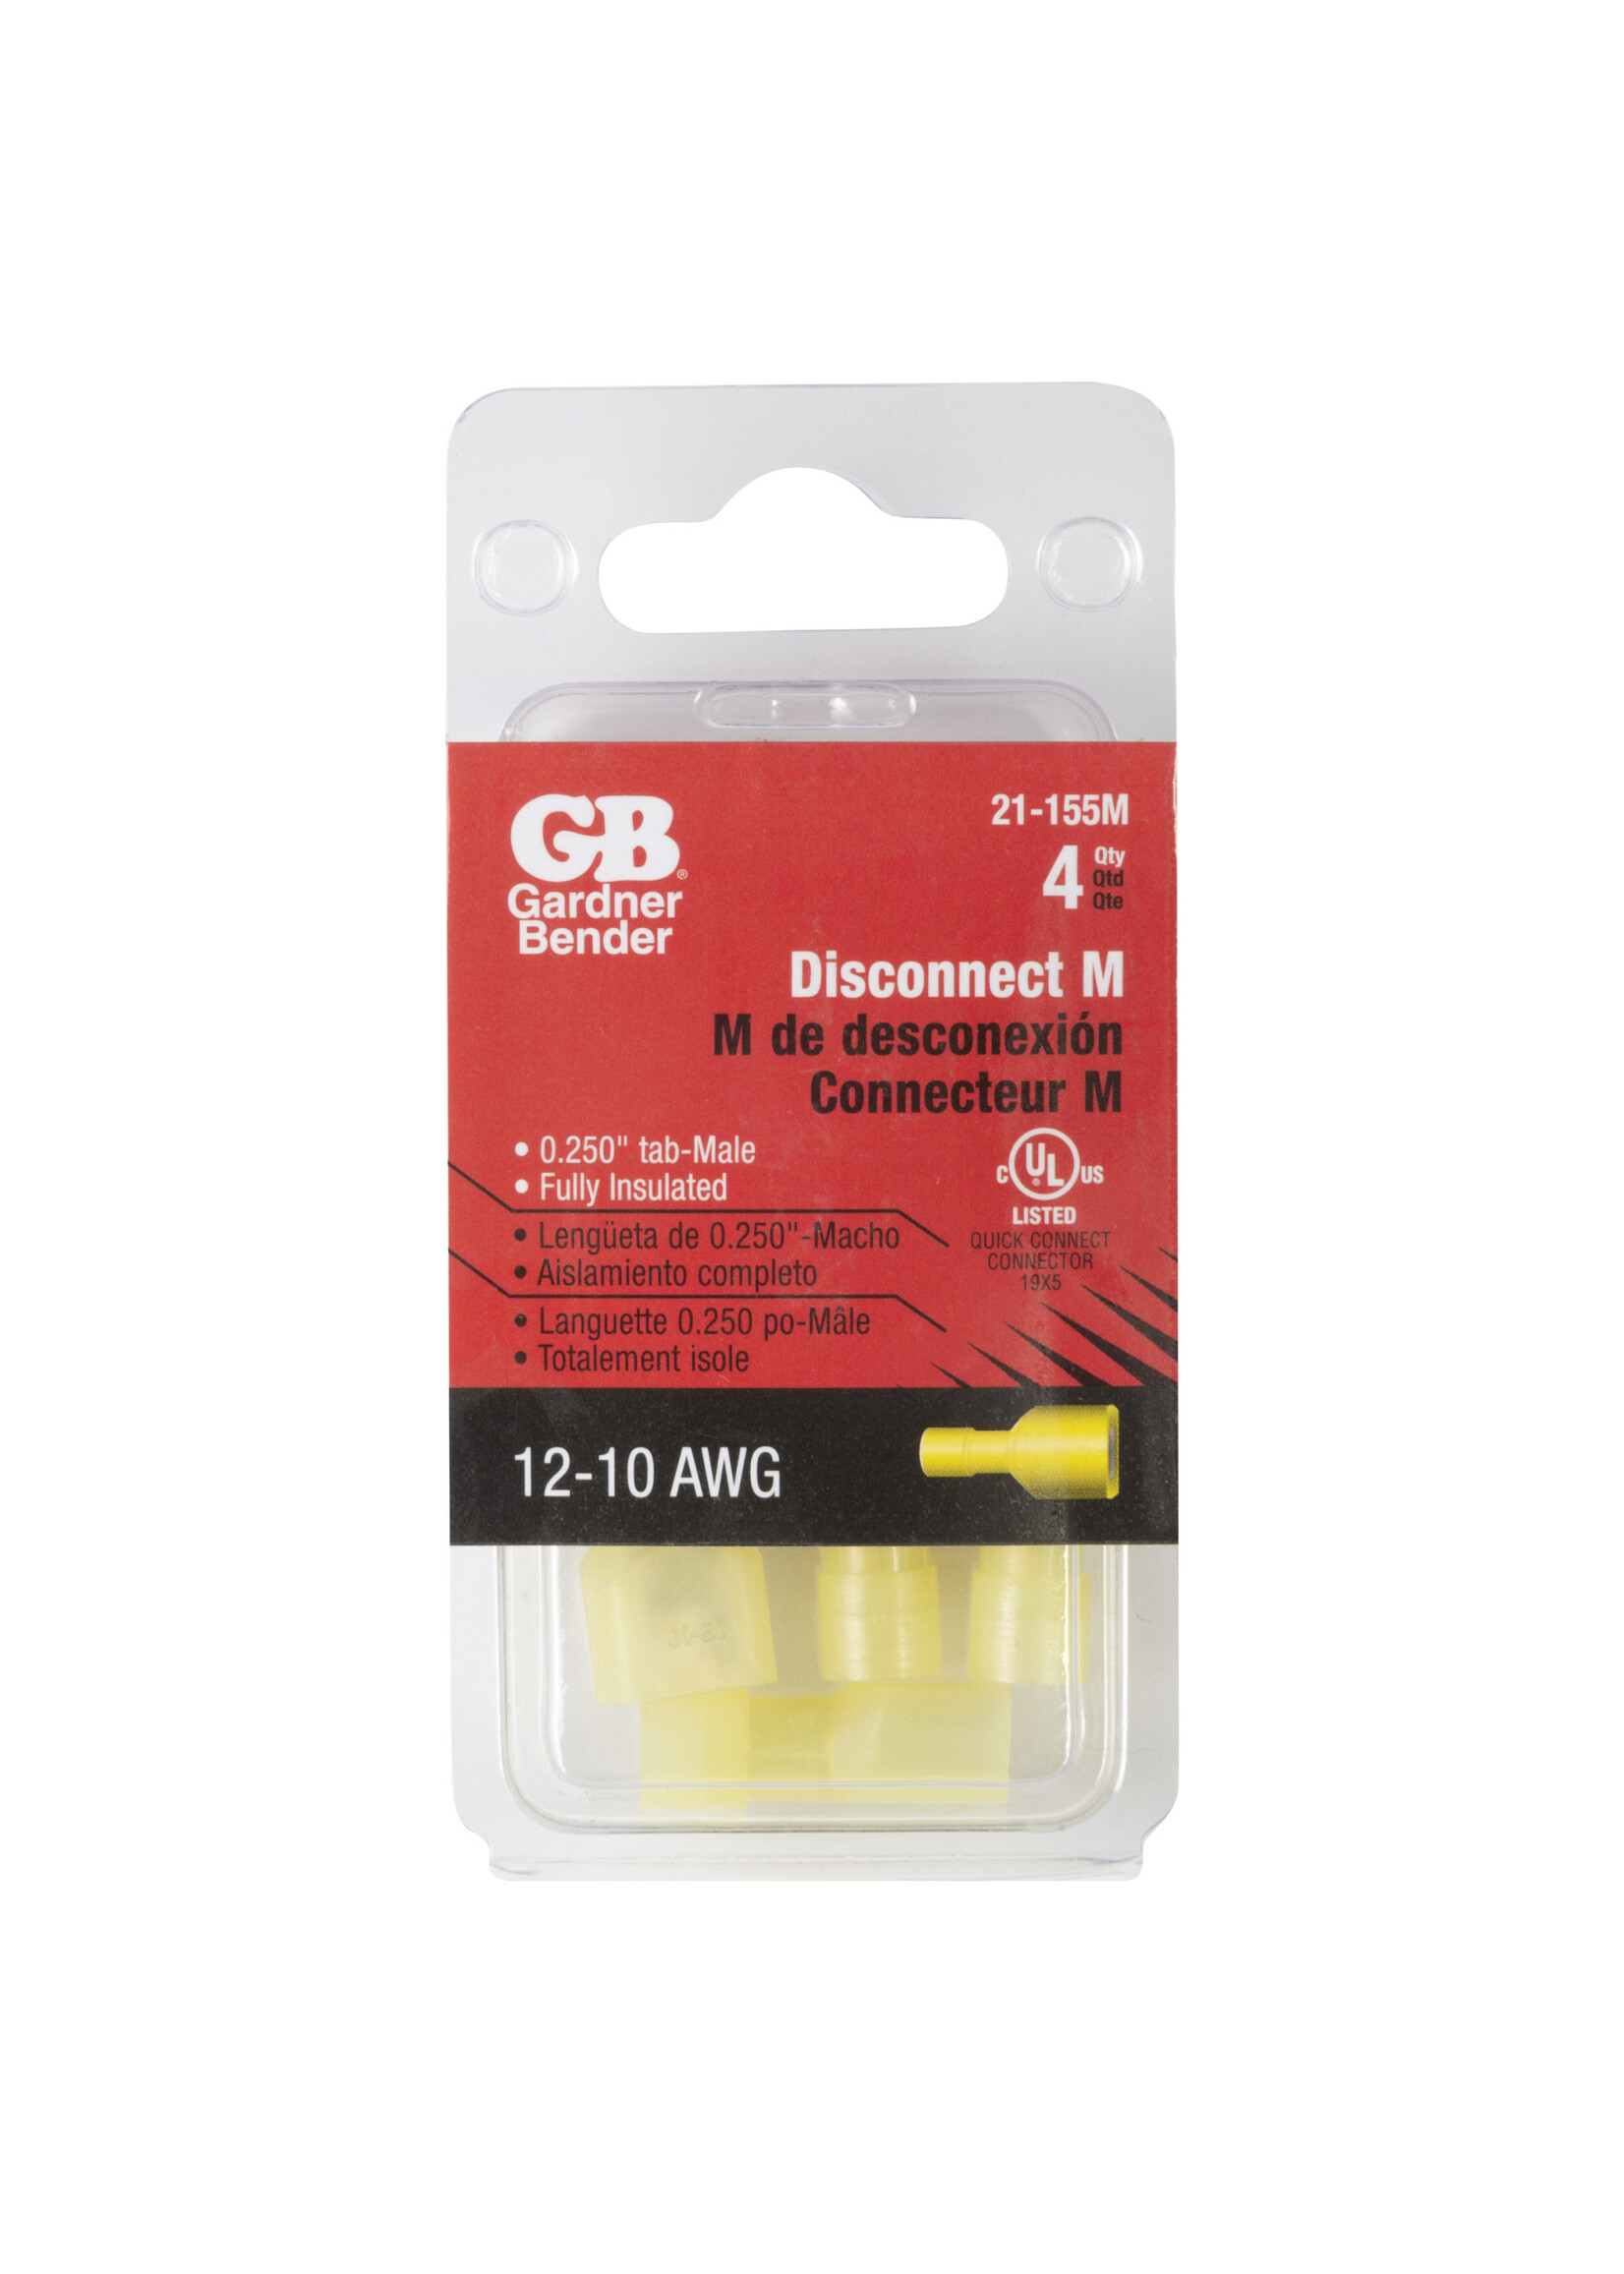 GARDNER BENDER #12-#10 AWG (5 mm²) Fully-Insulated Disconnect (0.25" Tab) - Male/ 21-155M